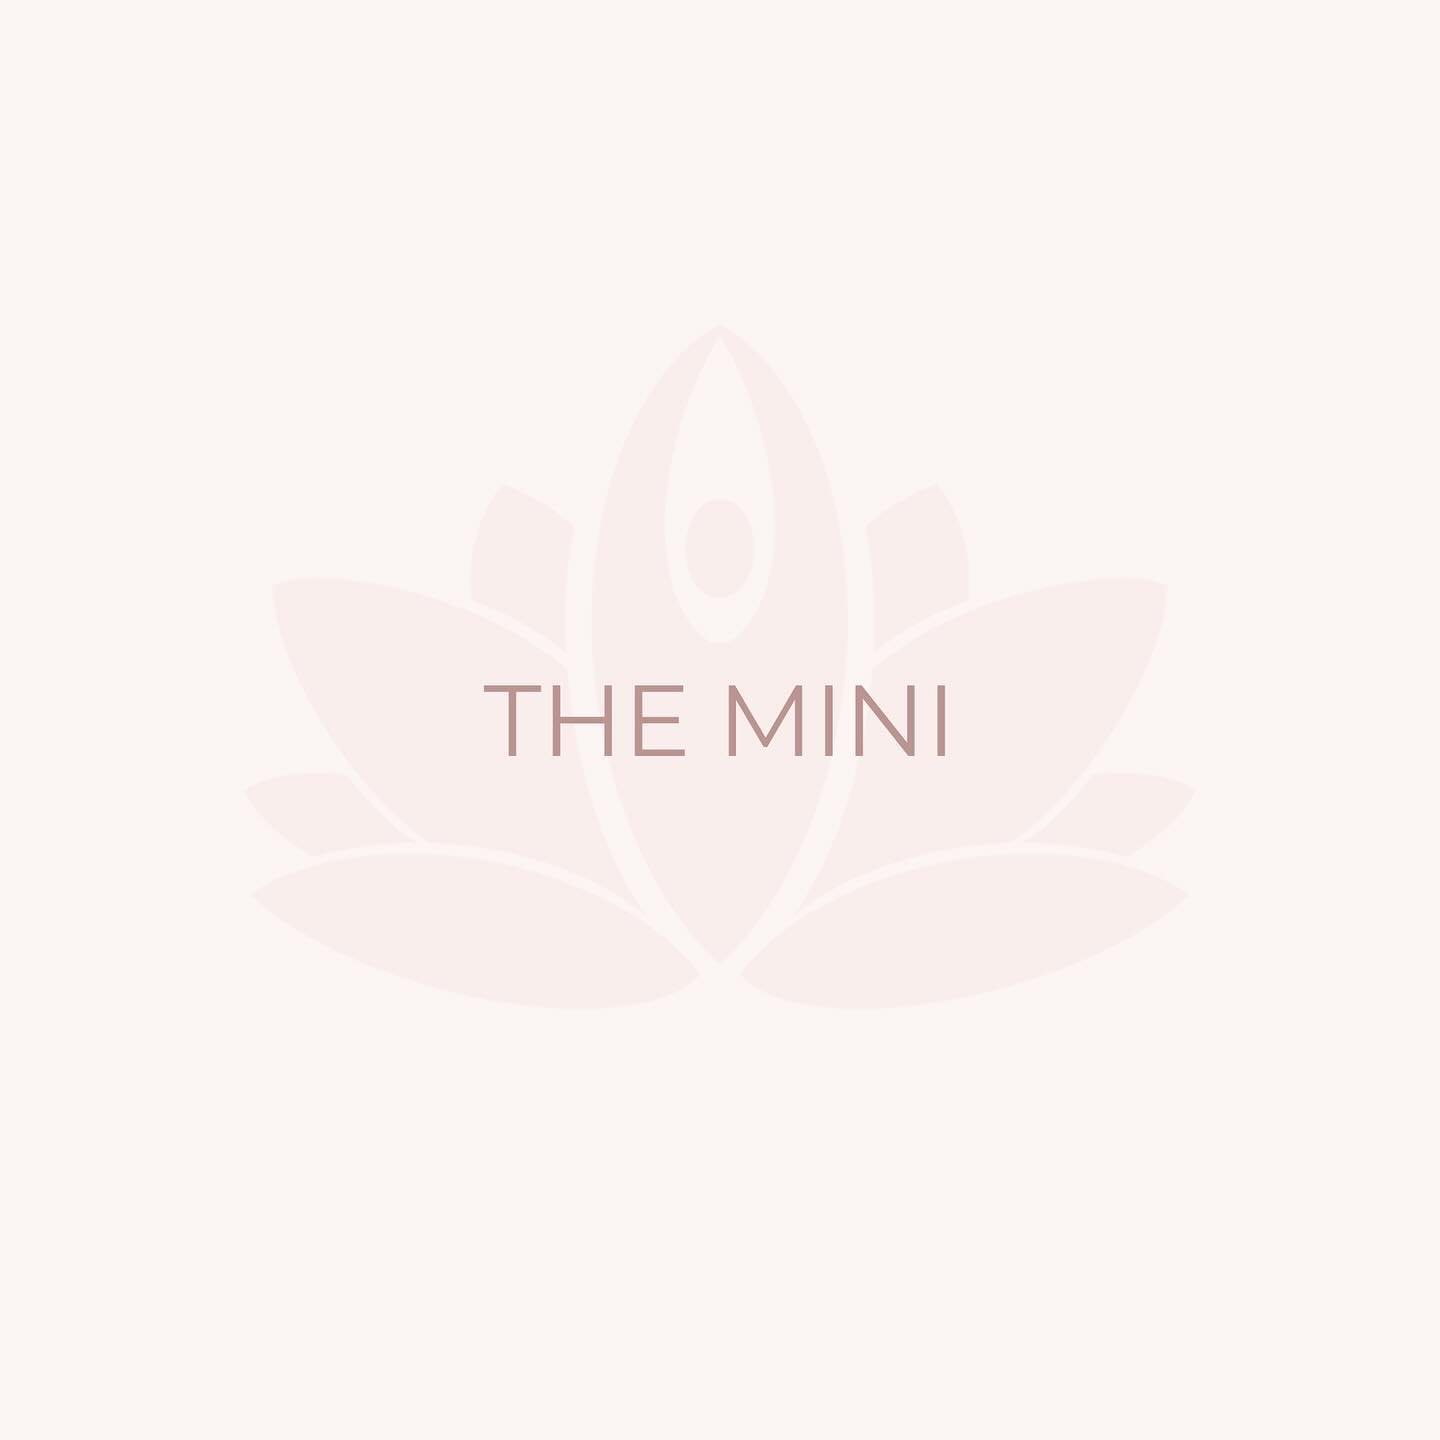 This week I&rsquo;m giving an overview of our 3 different membership options, first up: the MINI 🩷

With the mini membership you have:

✨ Access to 4 live classes per month
✨ Unlimited access to the on demand library
✨ Access to our bank of yummy re